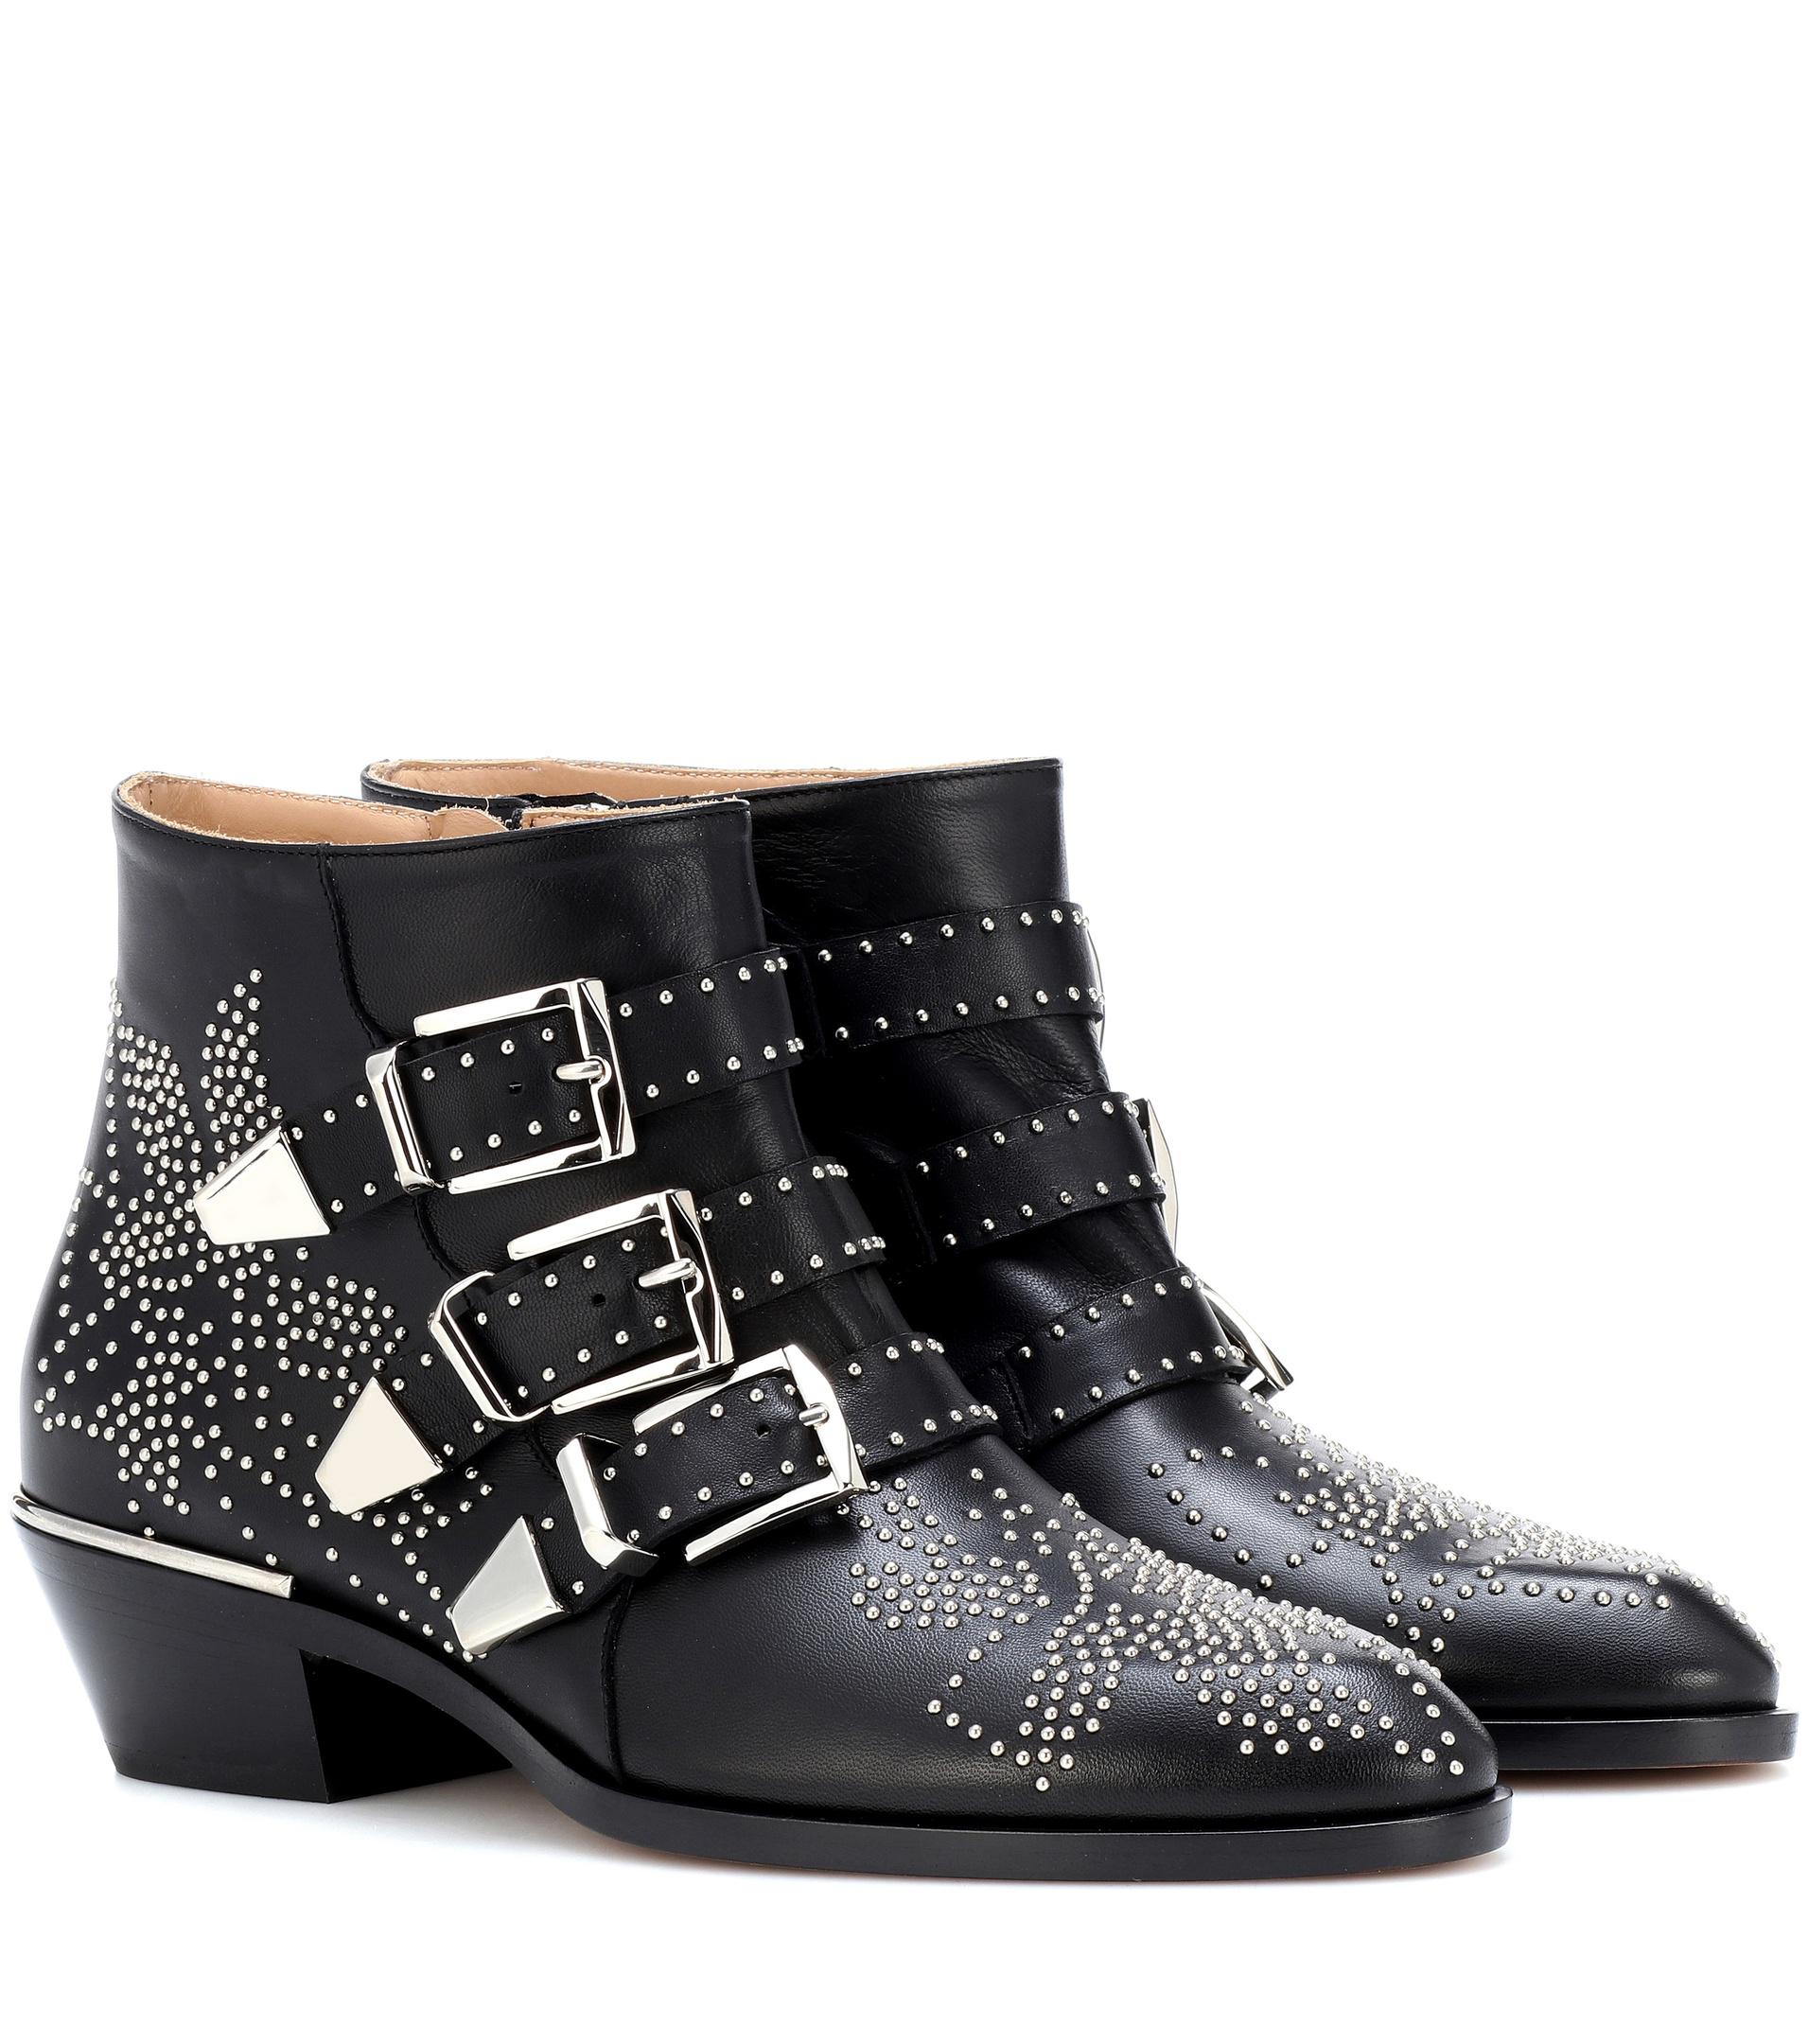 Chloé Susanna Studded Leather Ankle Boots in Black - Lyst